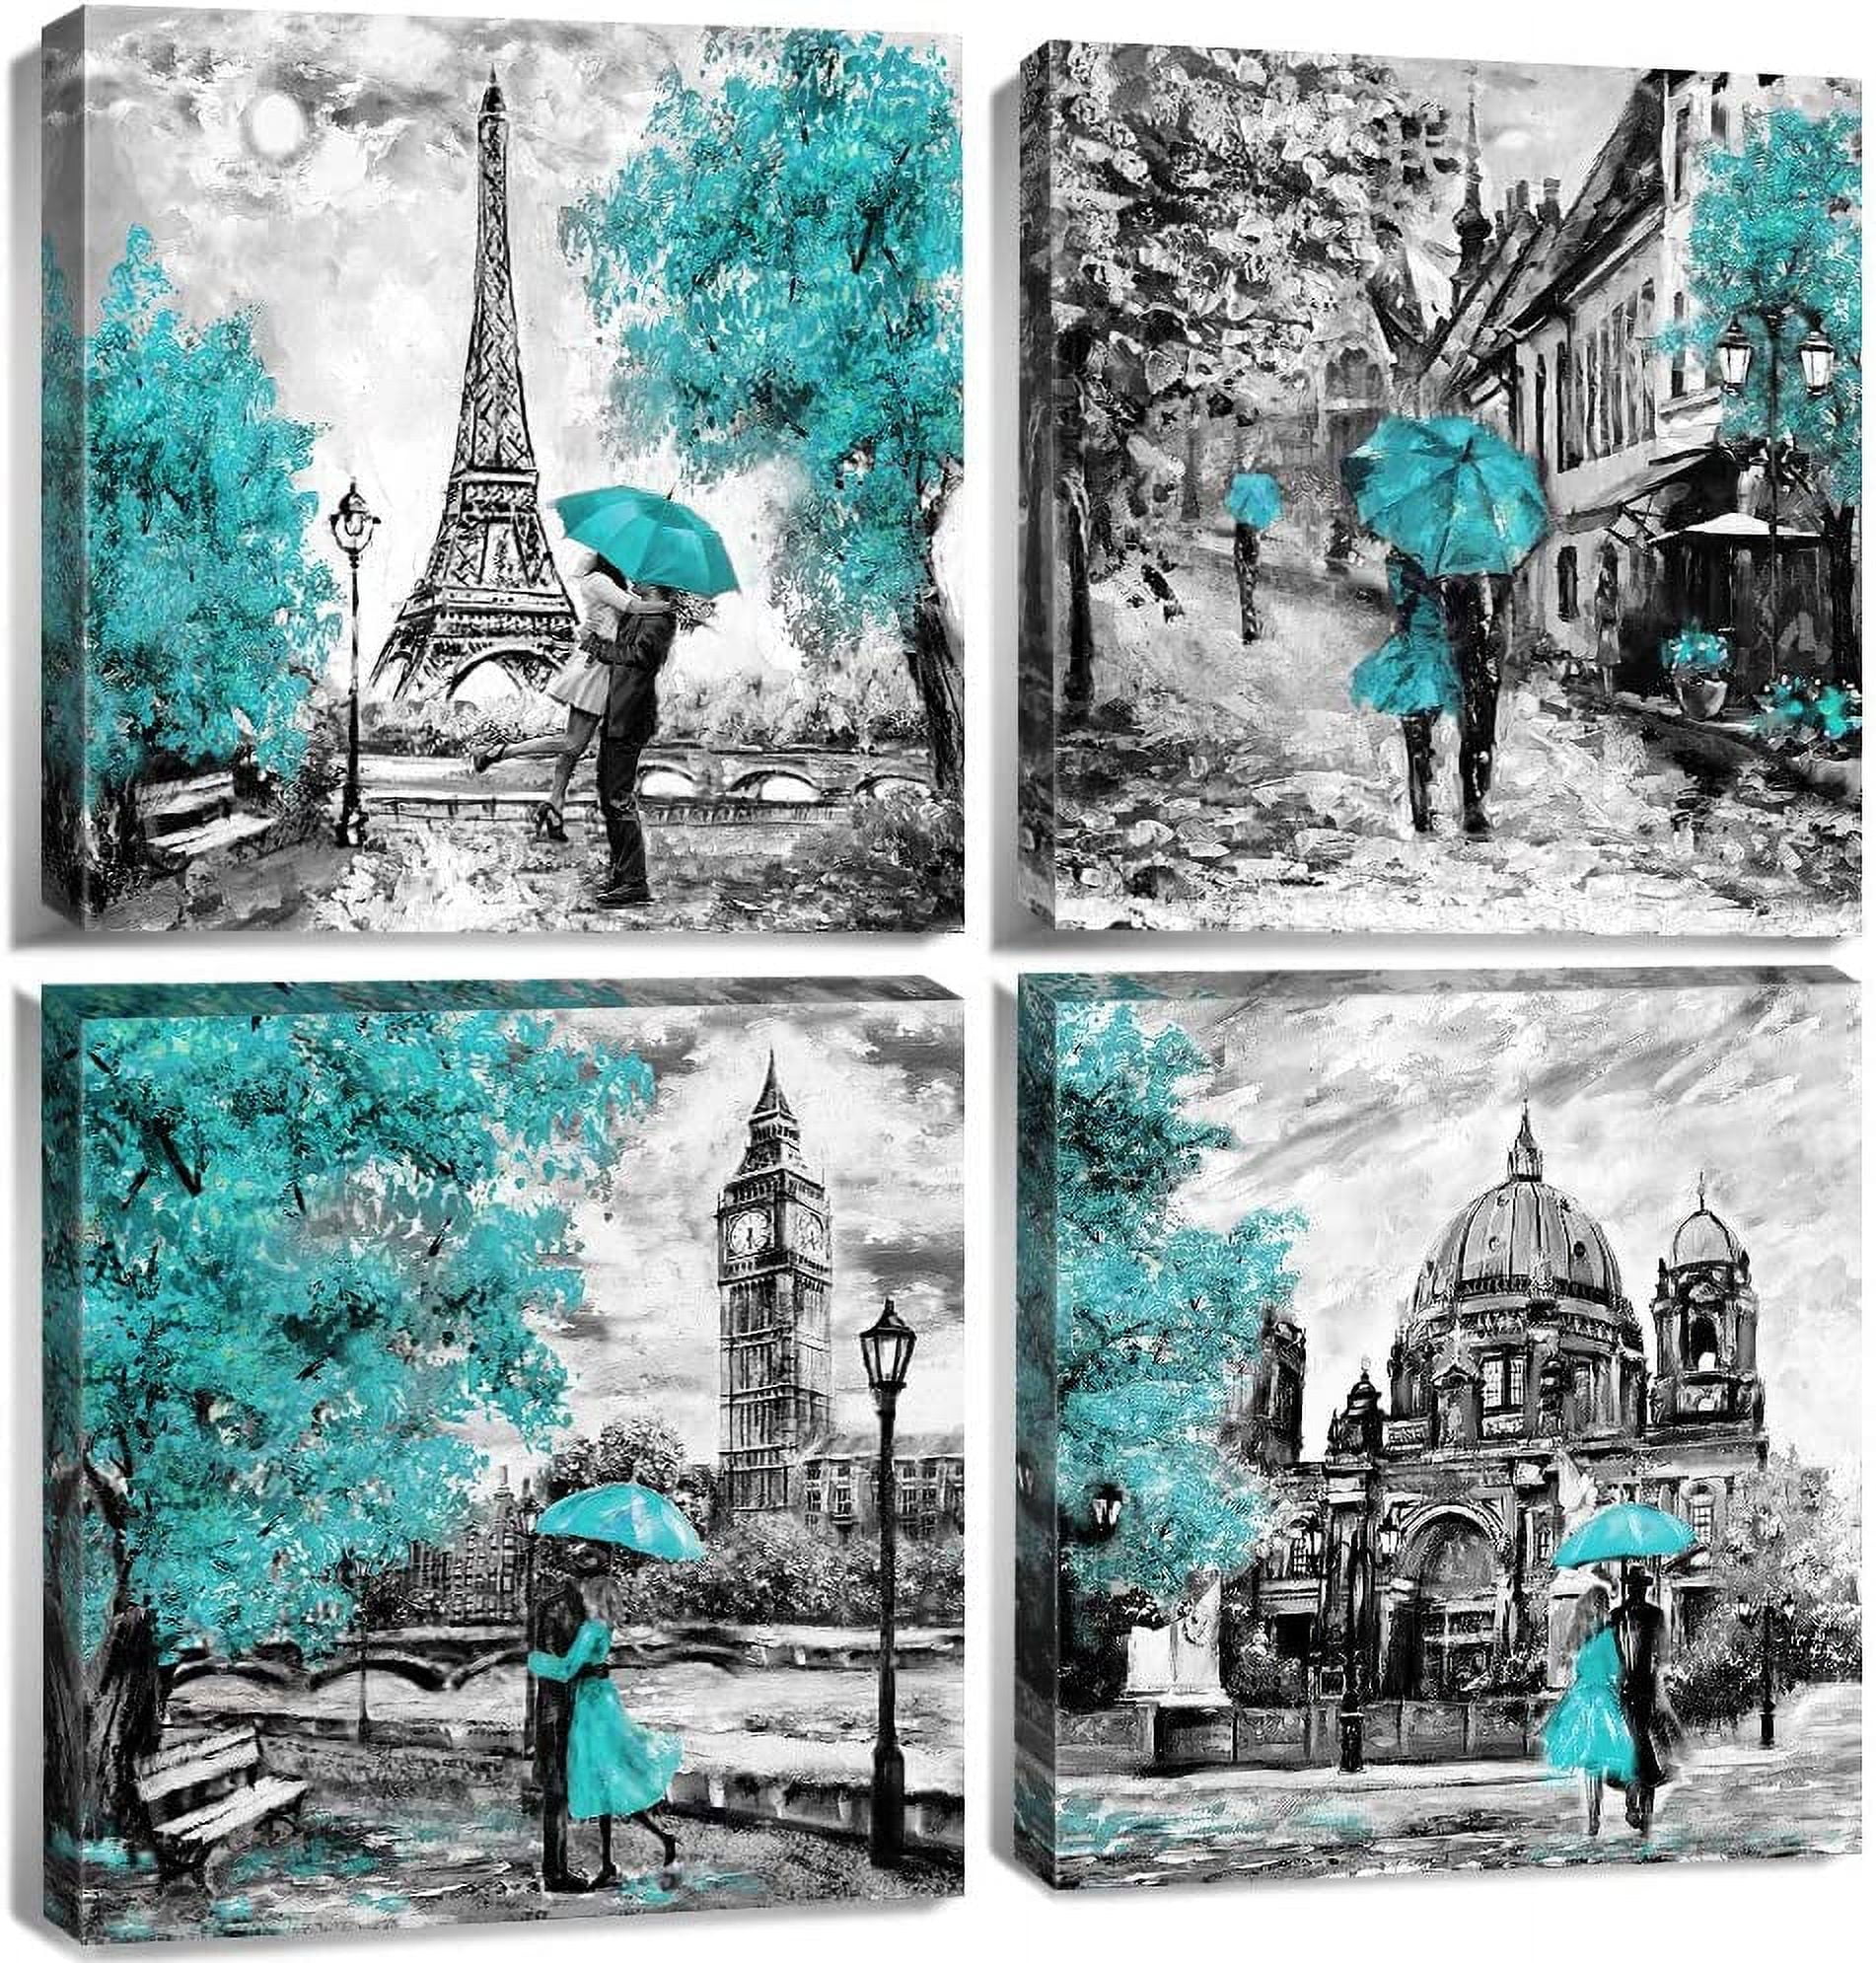 Paris Decor for Bedroom Teal Eiffel Tower Wall Decor Abstract Couples with  Umbrella Posters Bathroom Pictures Romantic City Painting Black and White Canvas  Wall Art Living Room 12x12